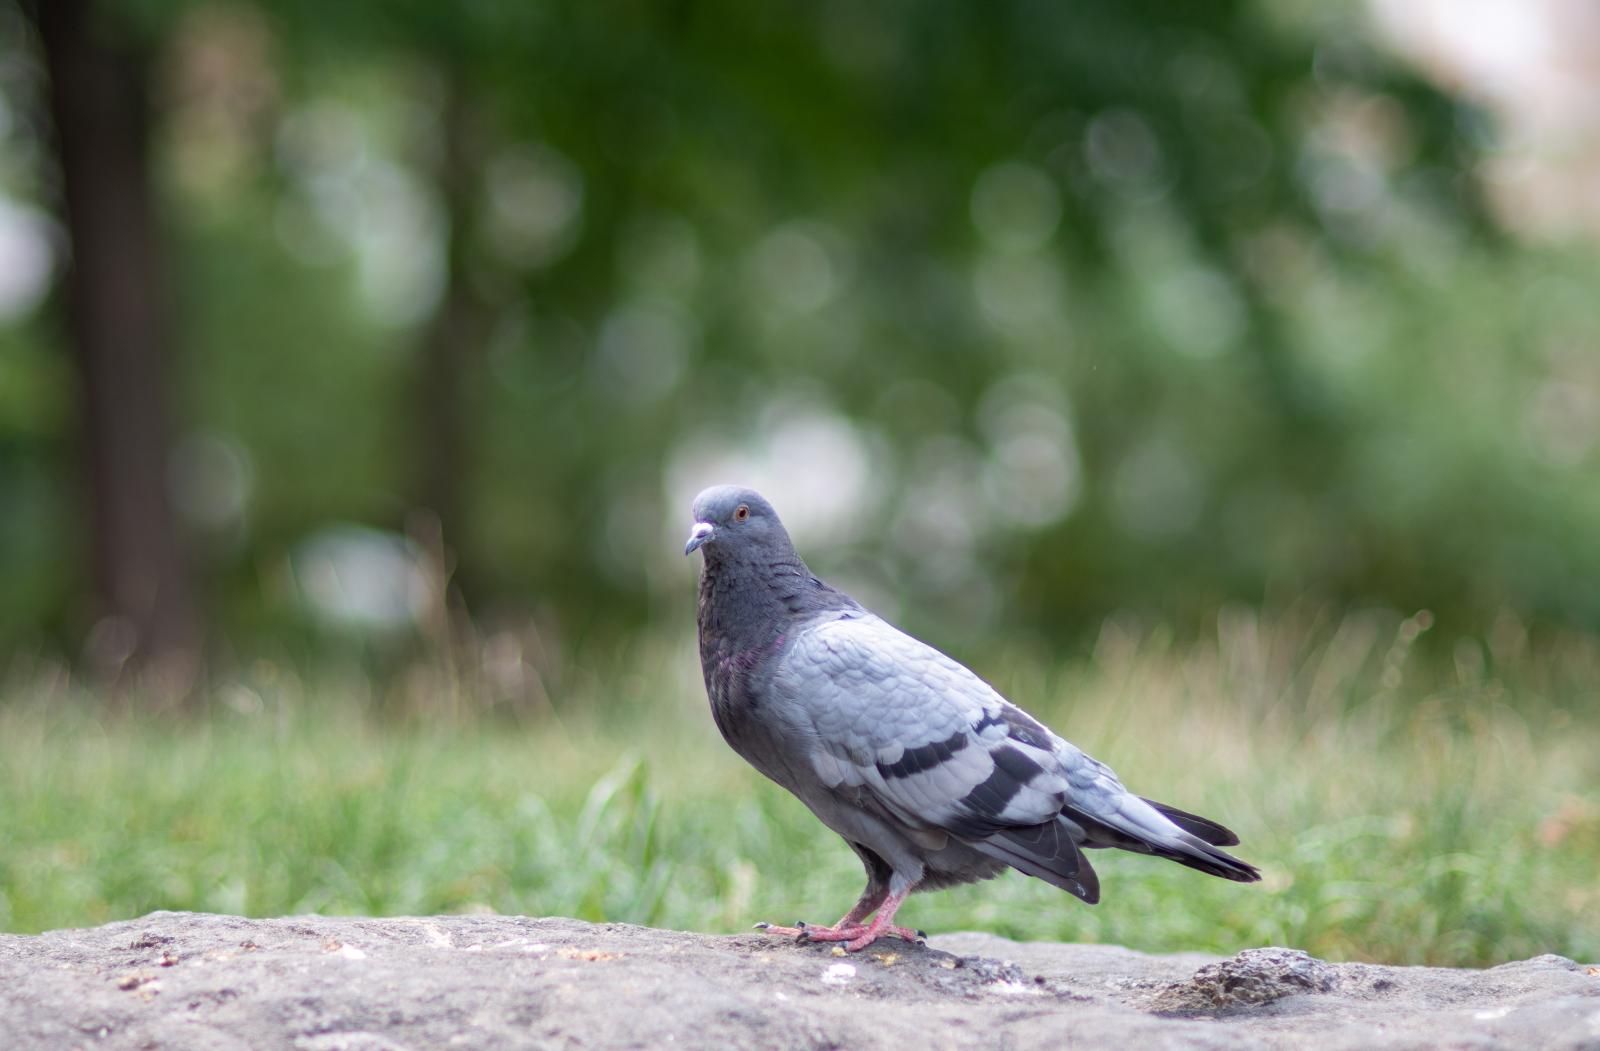 Pigeon | Buy this image